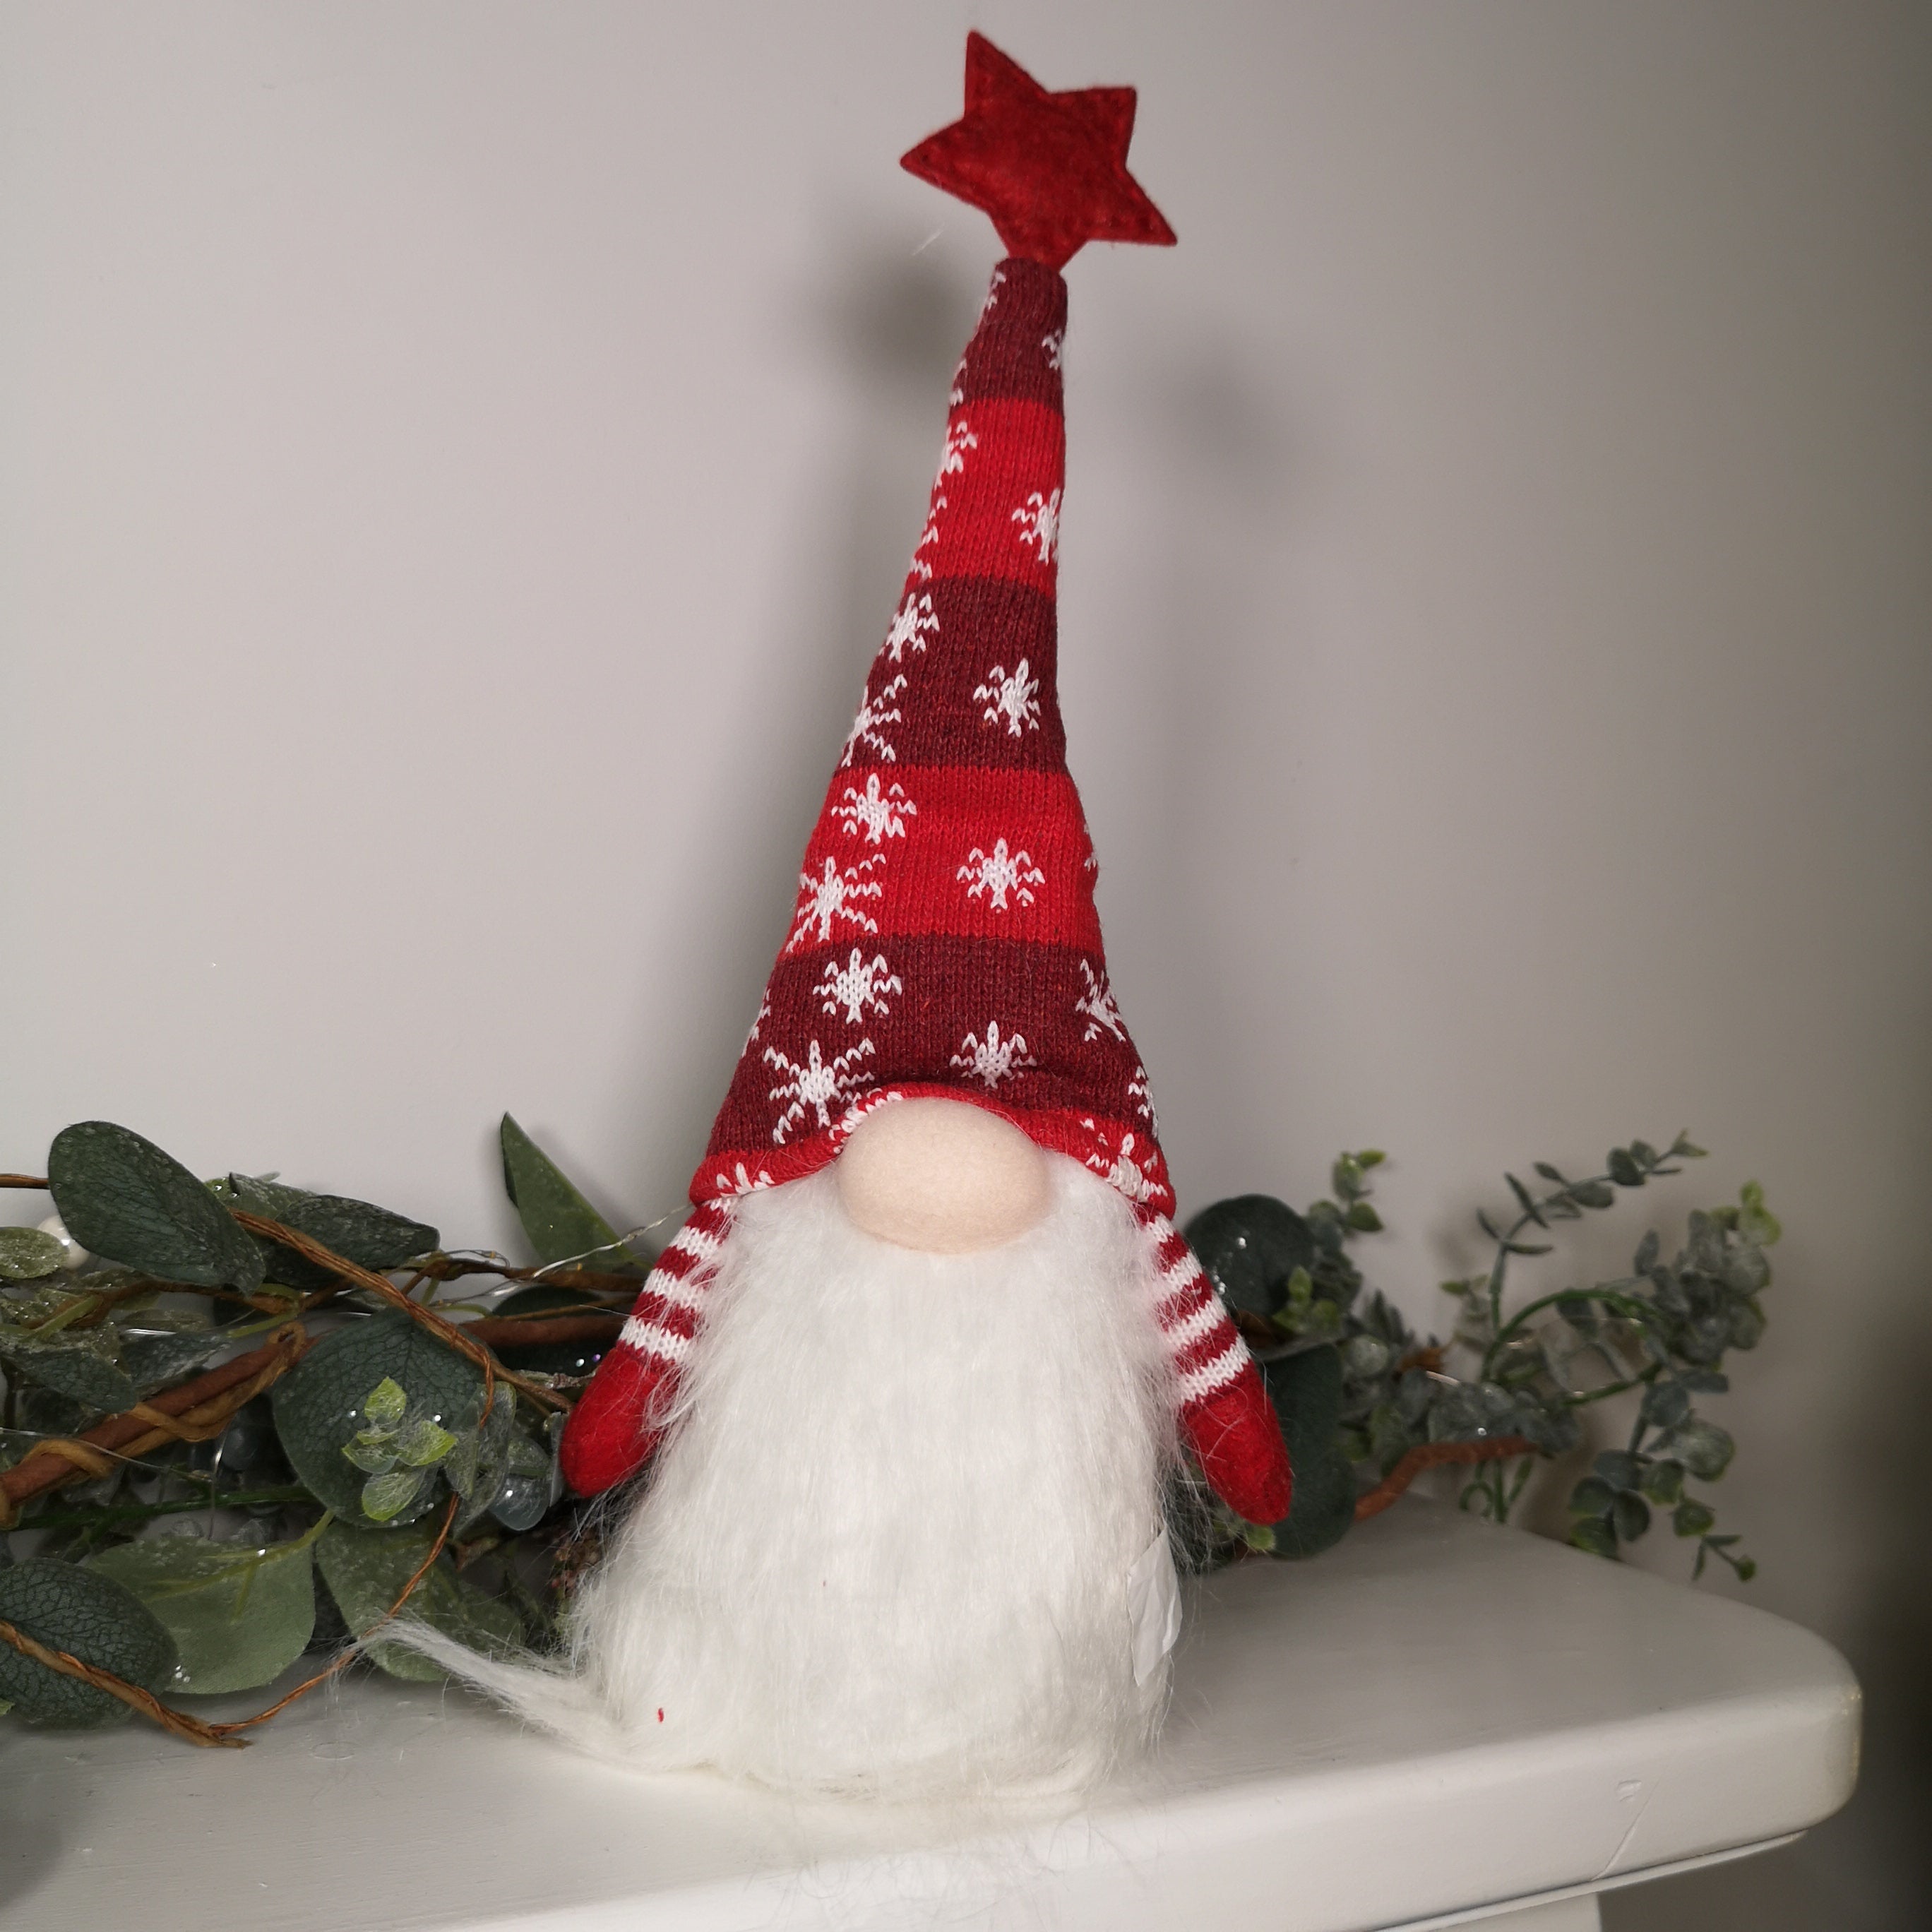 30cm Haired Sitting Christmas Gonk with Star Tipped Hat - Red & White